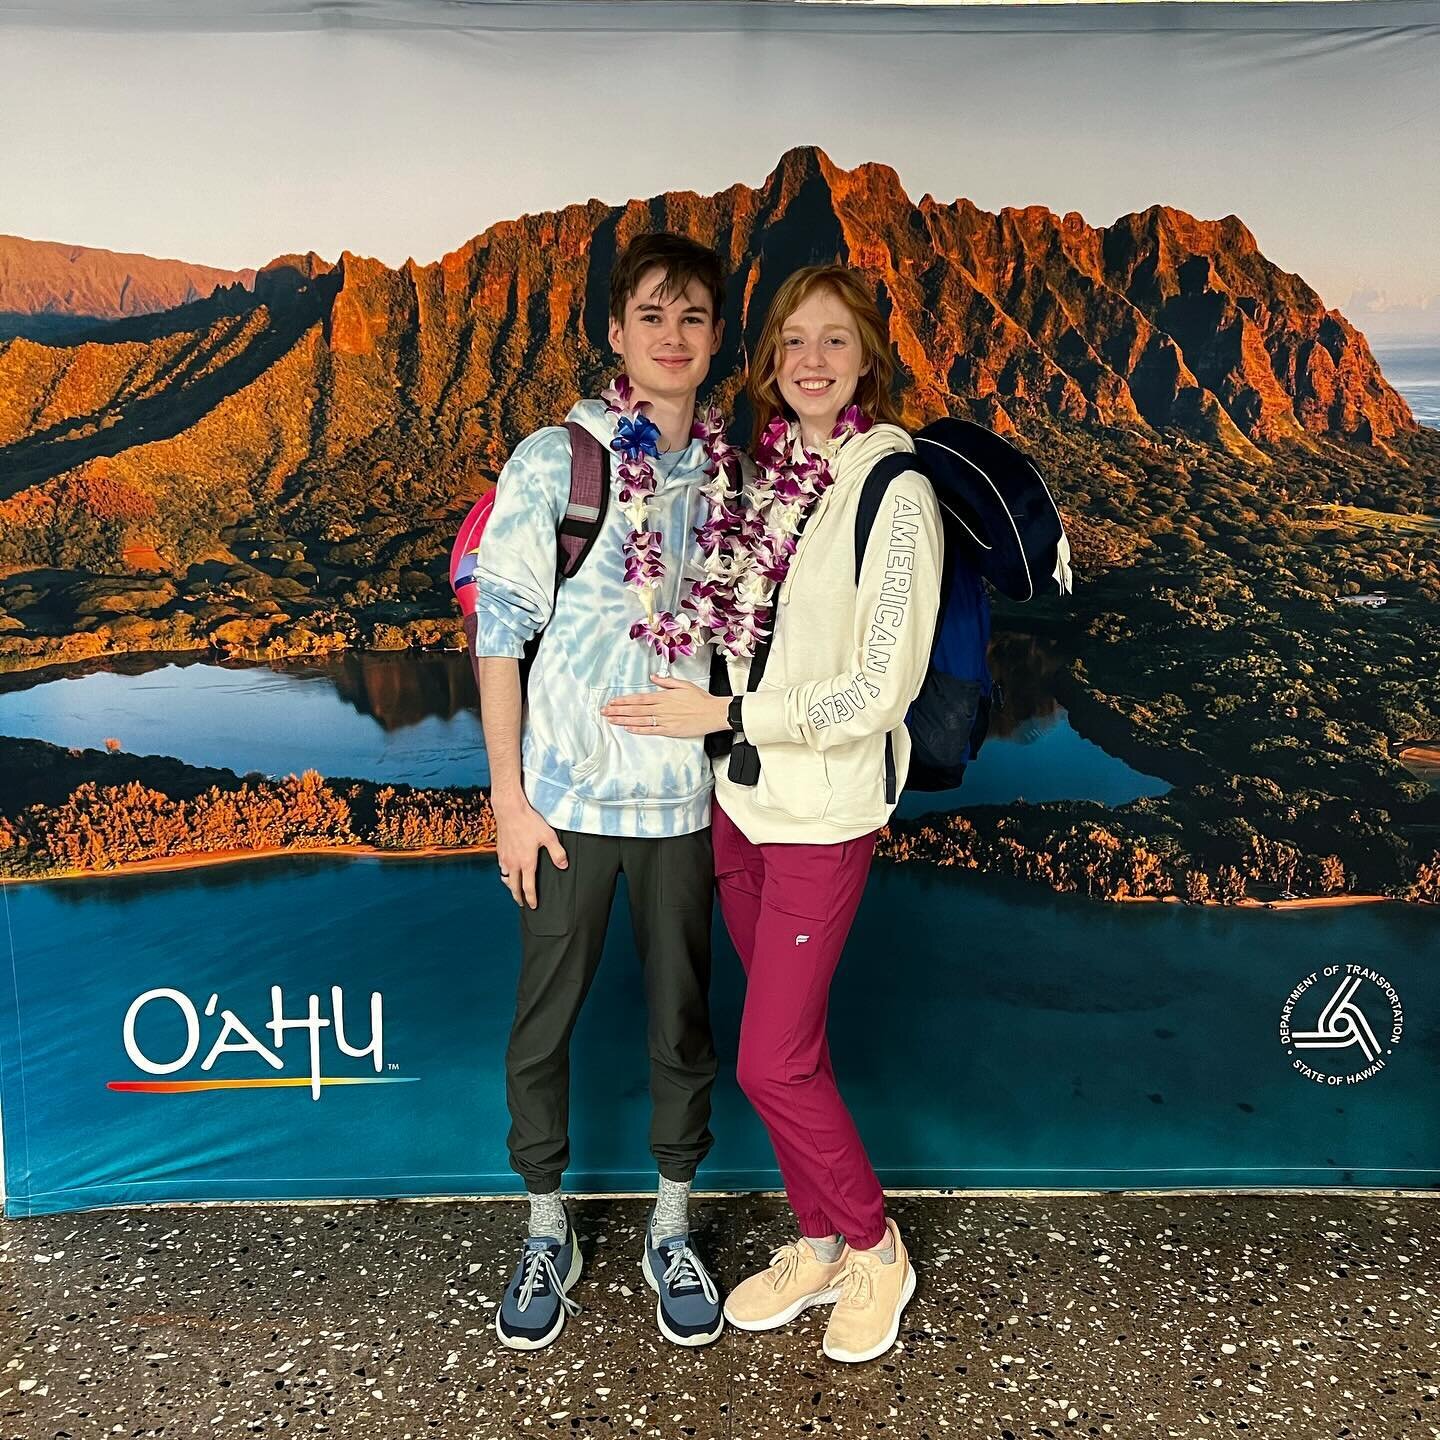 Congratulations to Mr. &amp; Mrs. Allison who just got married in Utah and are spending their honeymoon in Hawai&rsquo;i. This is their first time to the islands and they are very excited! We wish you both the best of luck! Welcome to a beautiful day